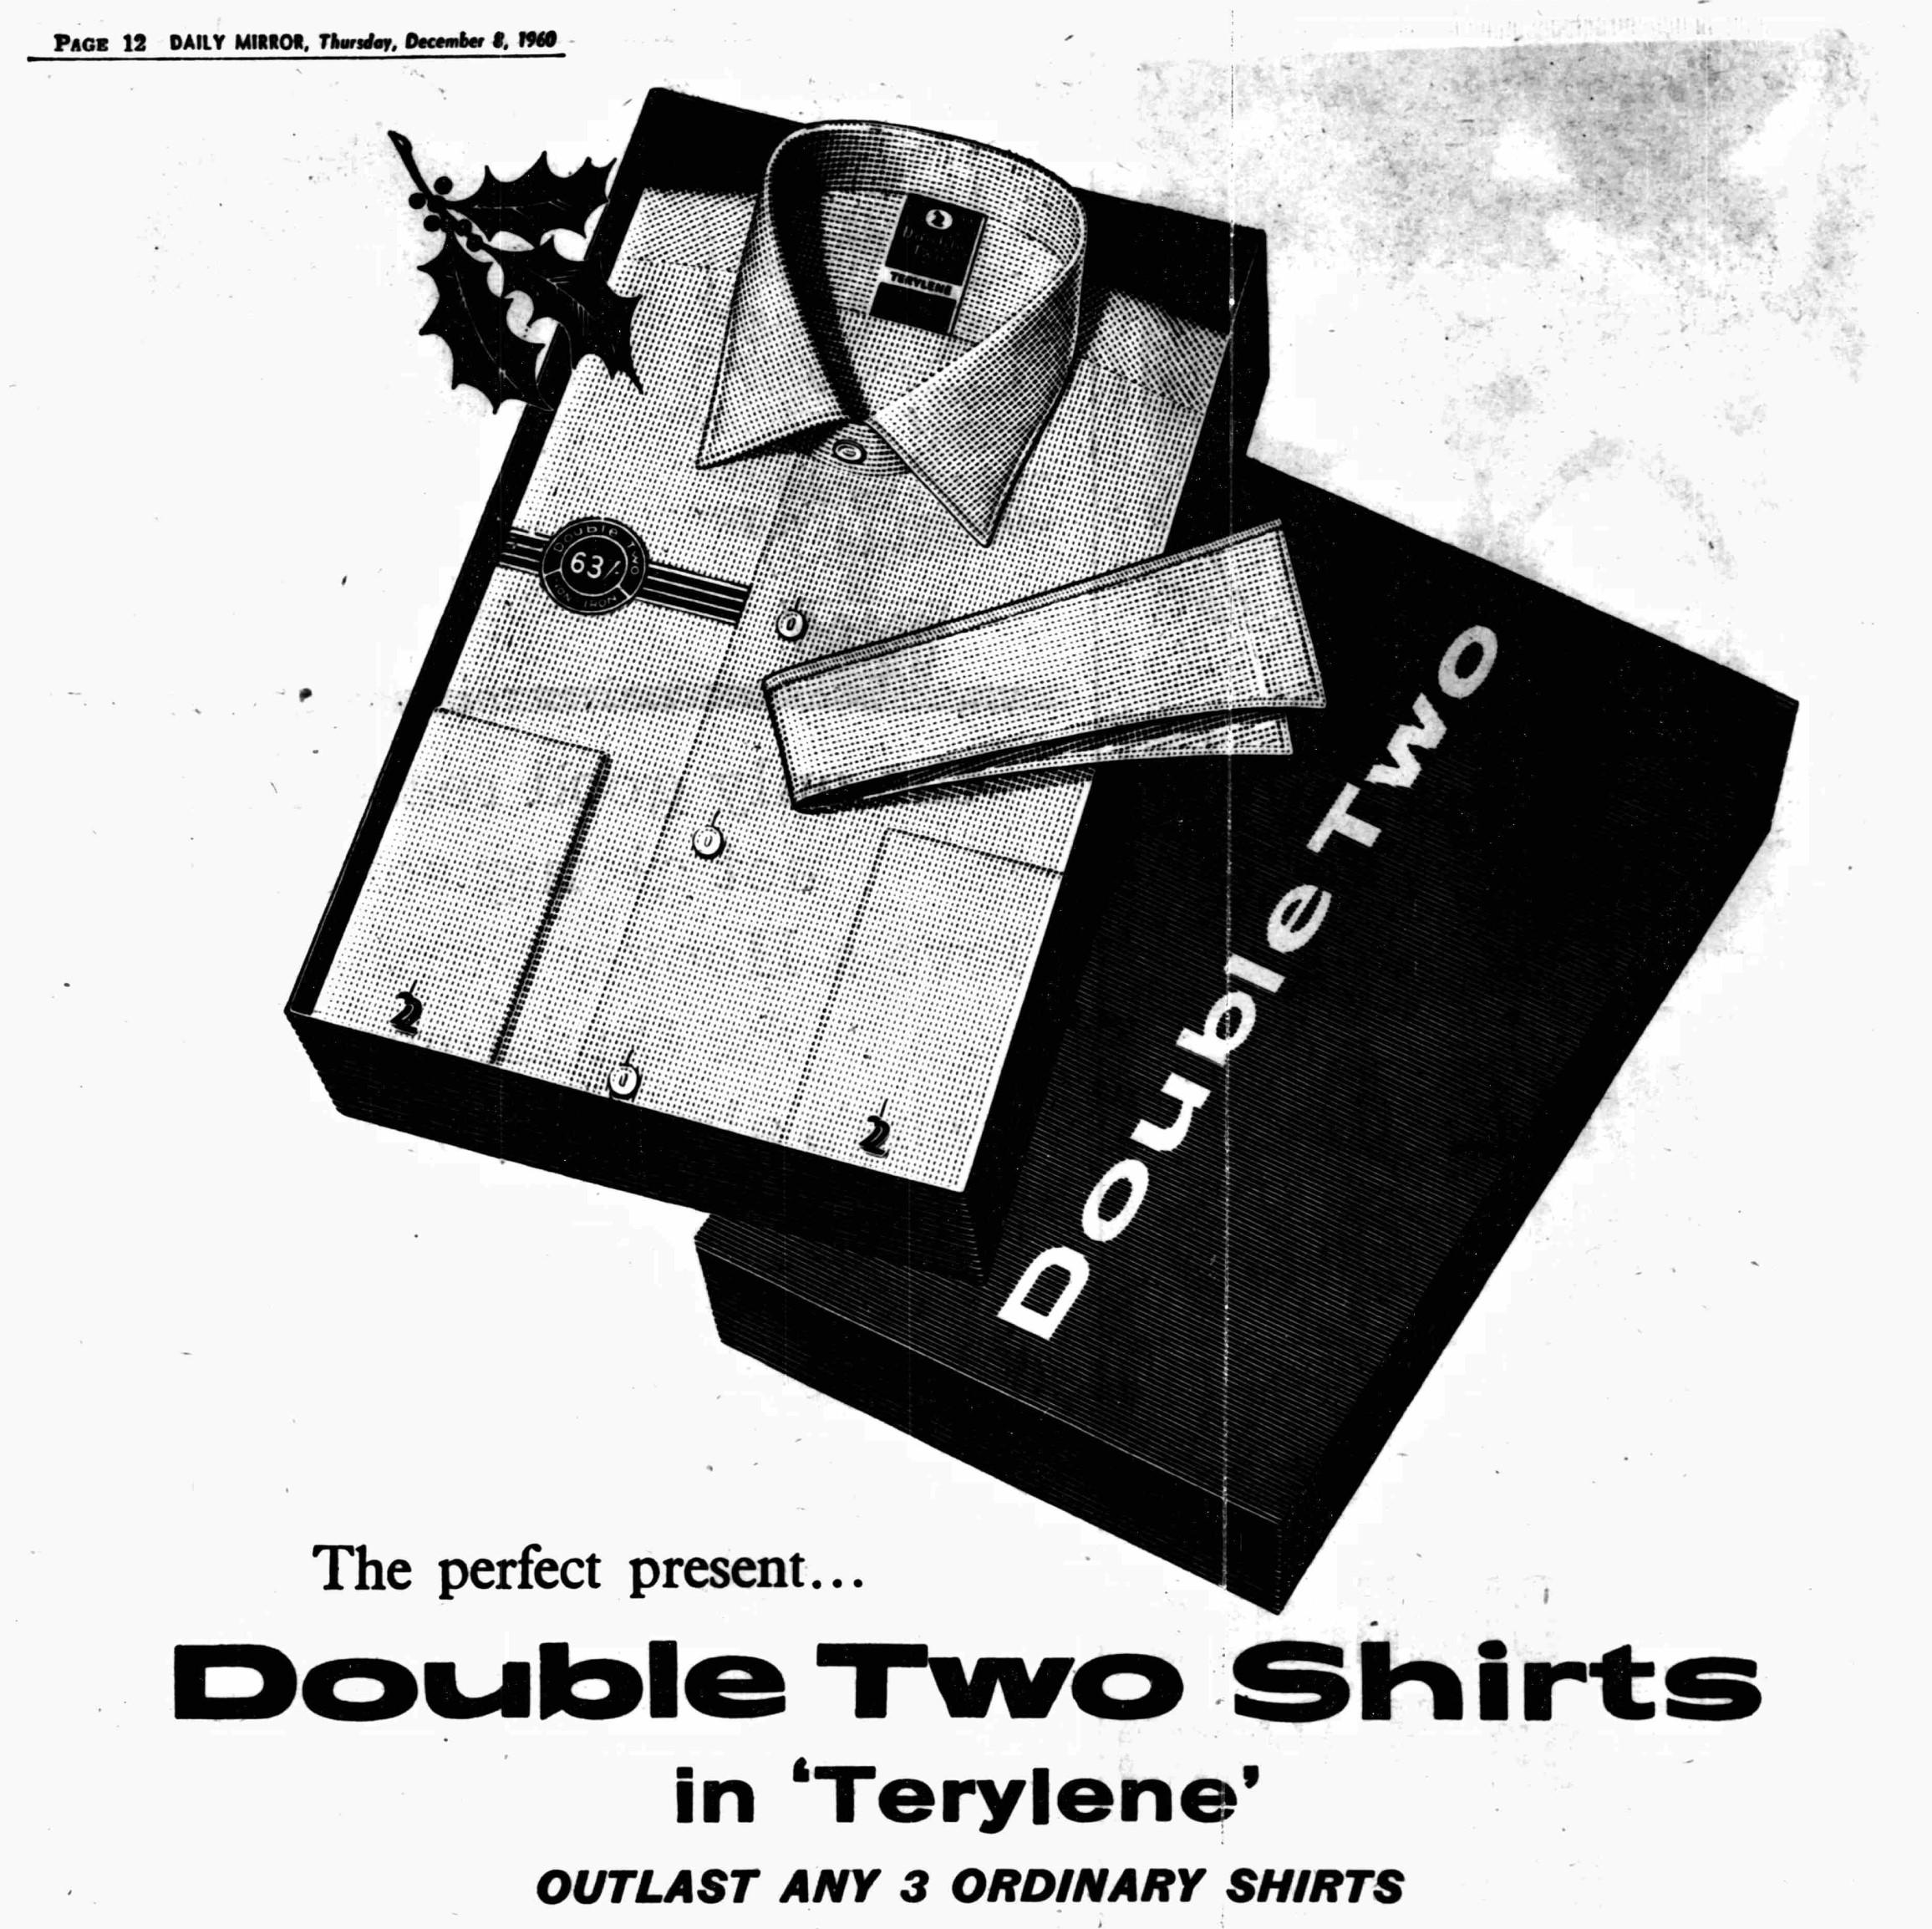 Double Two Shirts in Terylene Daily Mirror Ad 1960